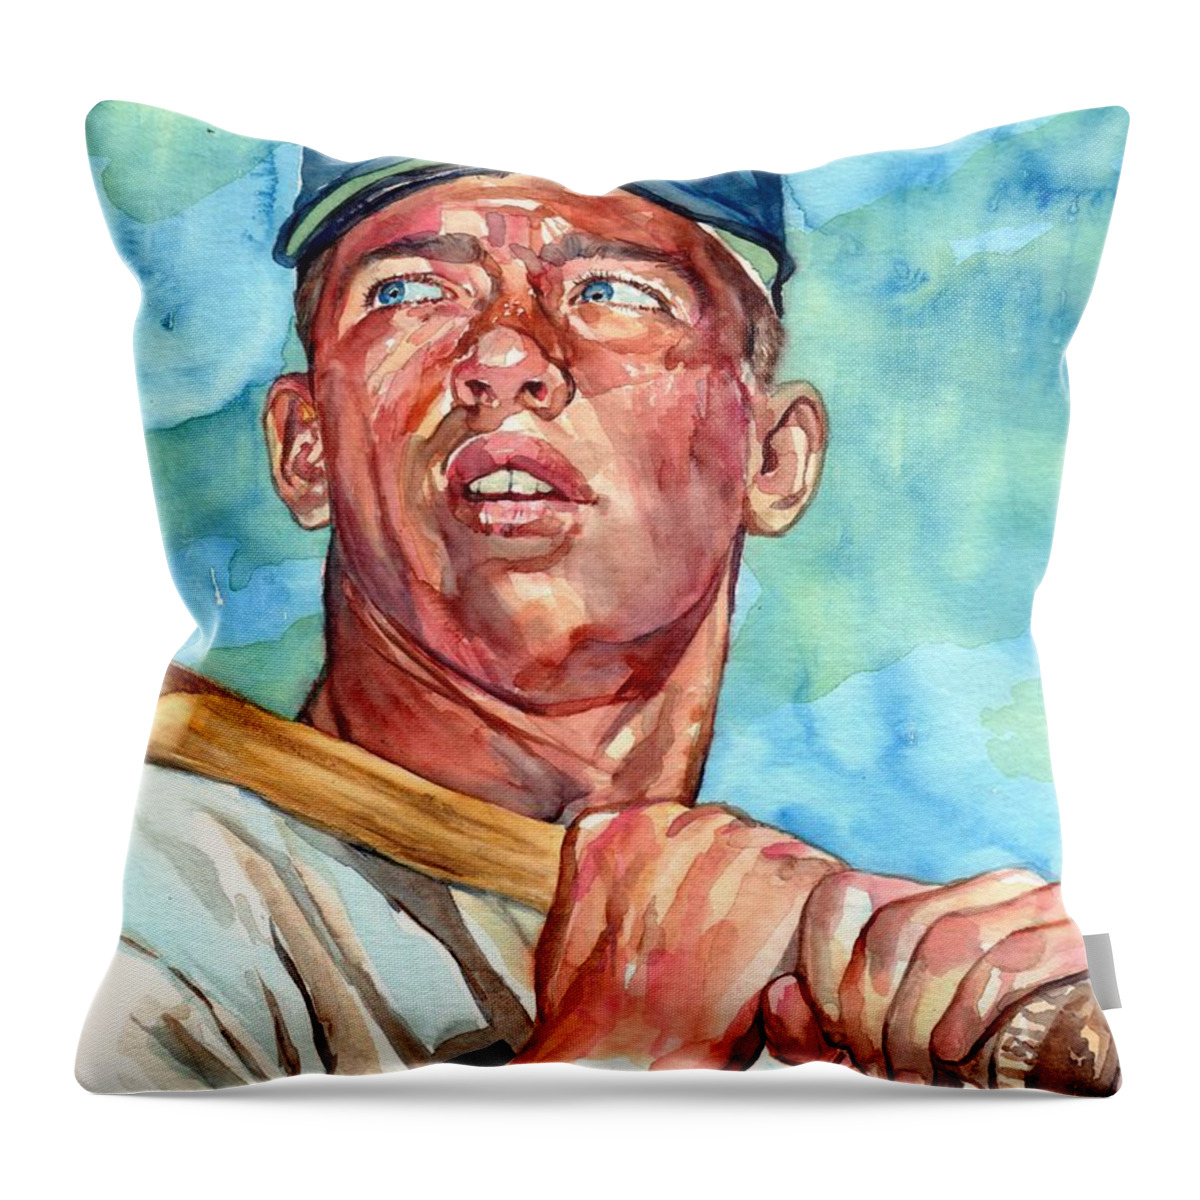 Mickey Throw Pillow featuring the painting Mickey Mantle Painting by Suzann Sines